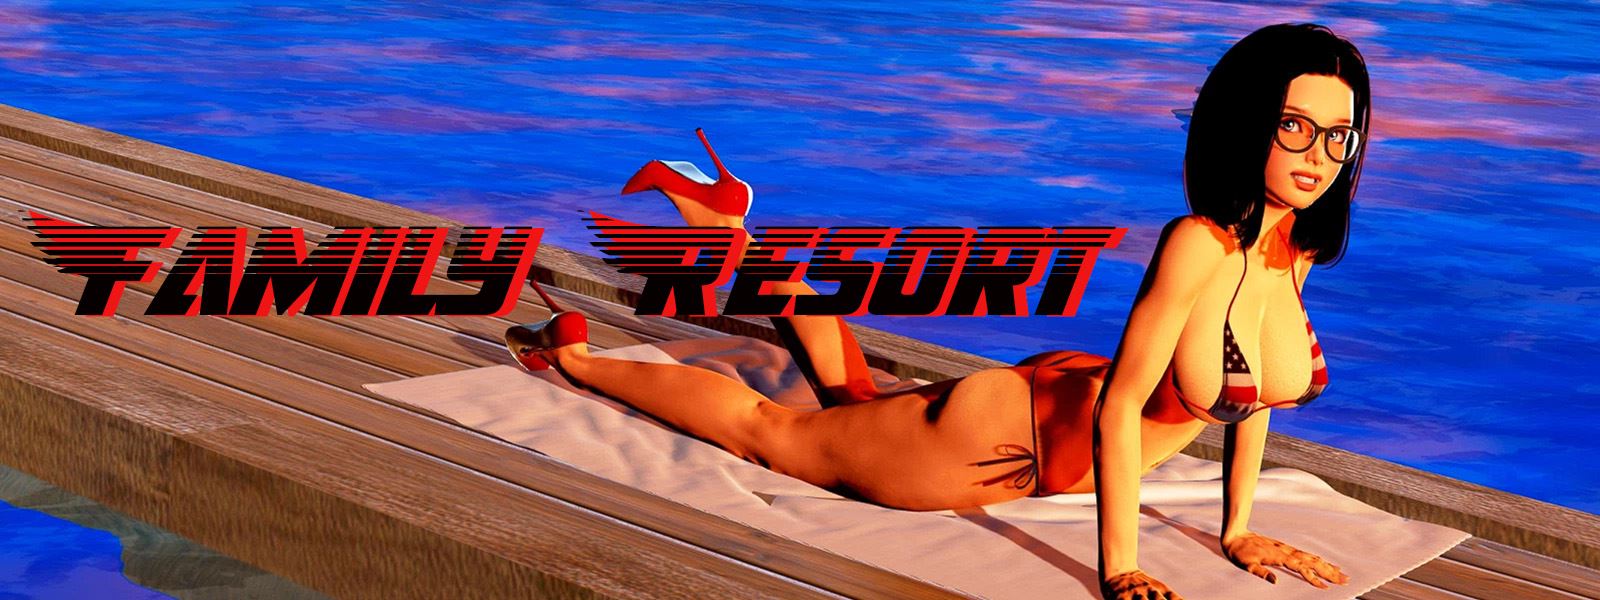 Family Resort Ren'Py Porn Sex Game v.Demo Download for Windows, MacOS,  Linux, Android